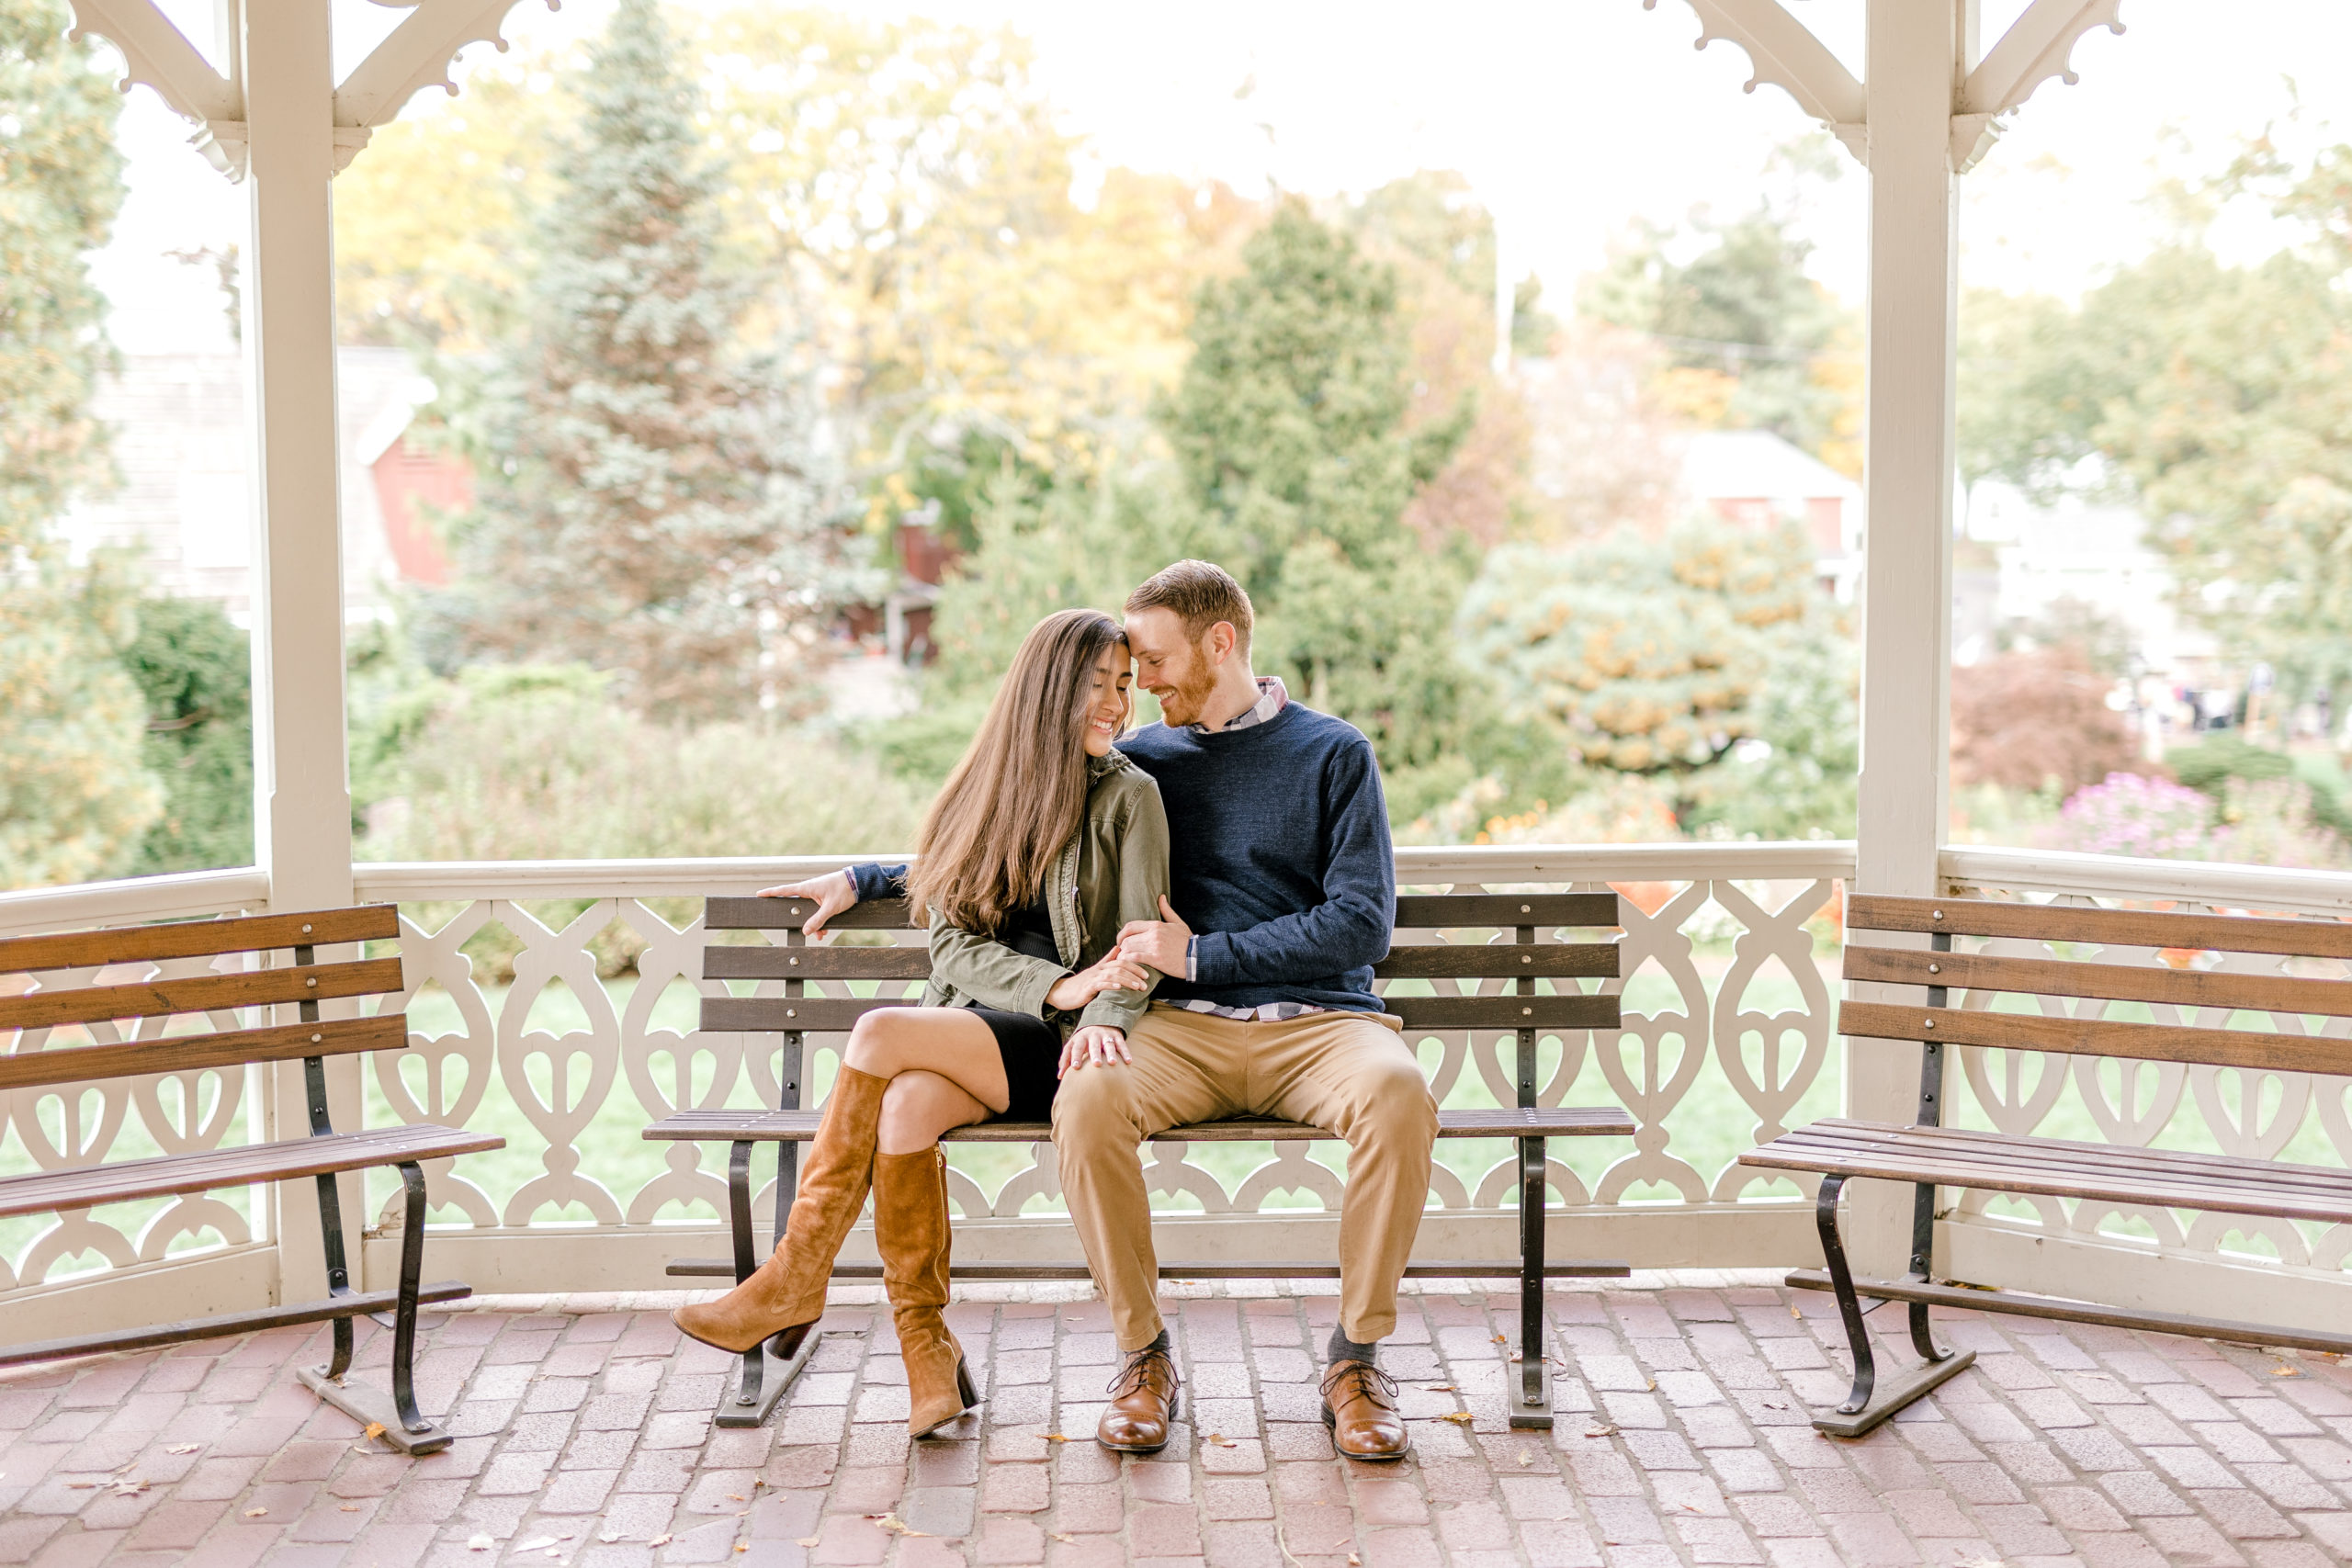 Fall Peddlers Village Engagement Session